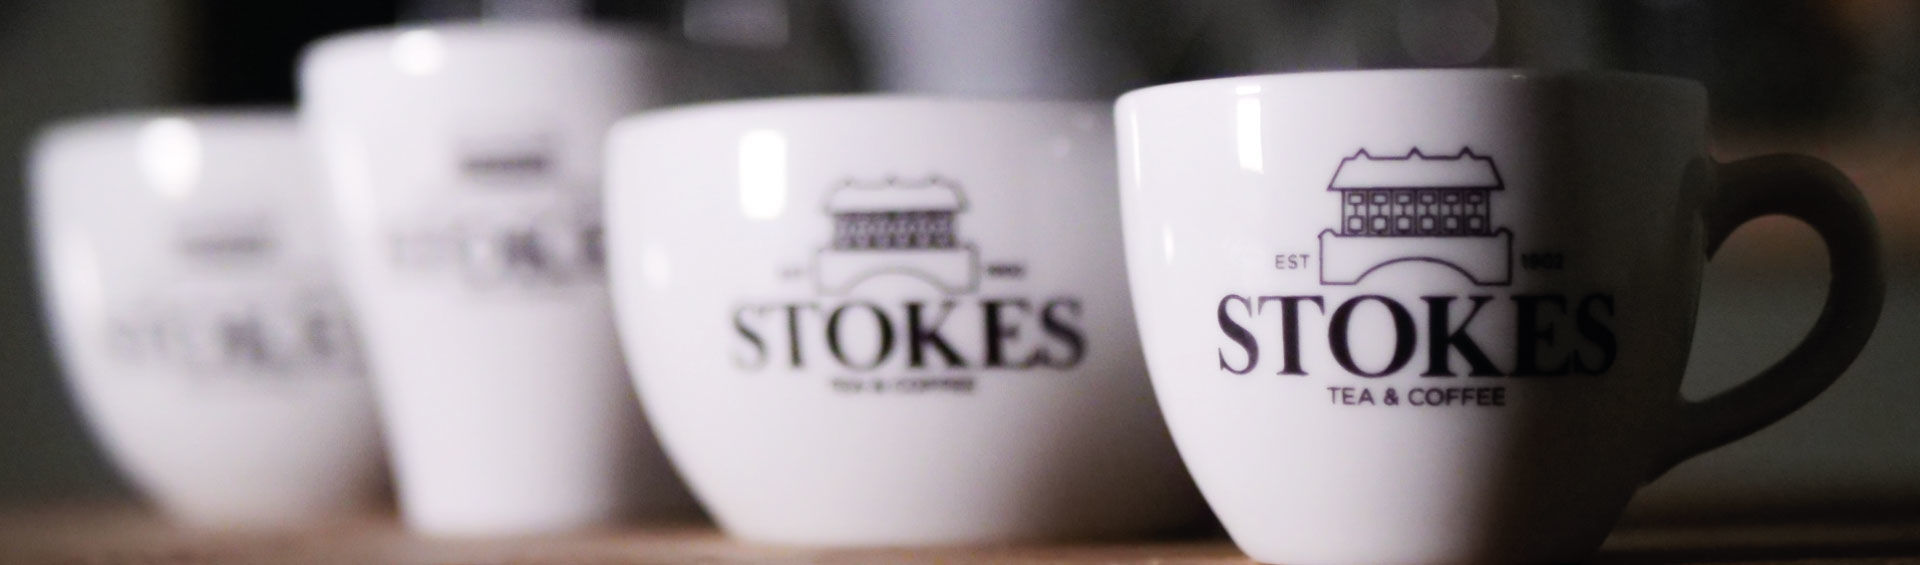 Stokes Coffee Brand Banner